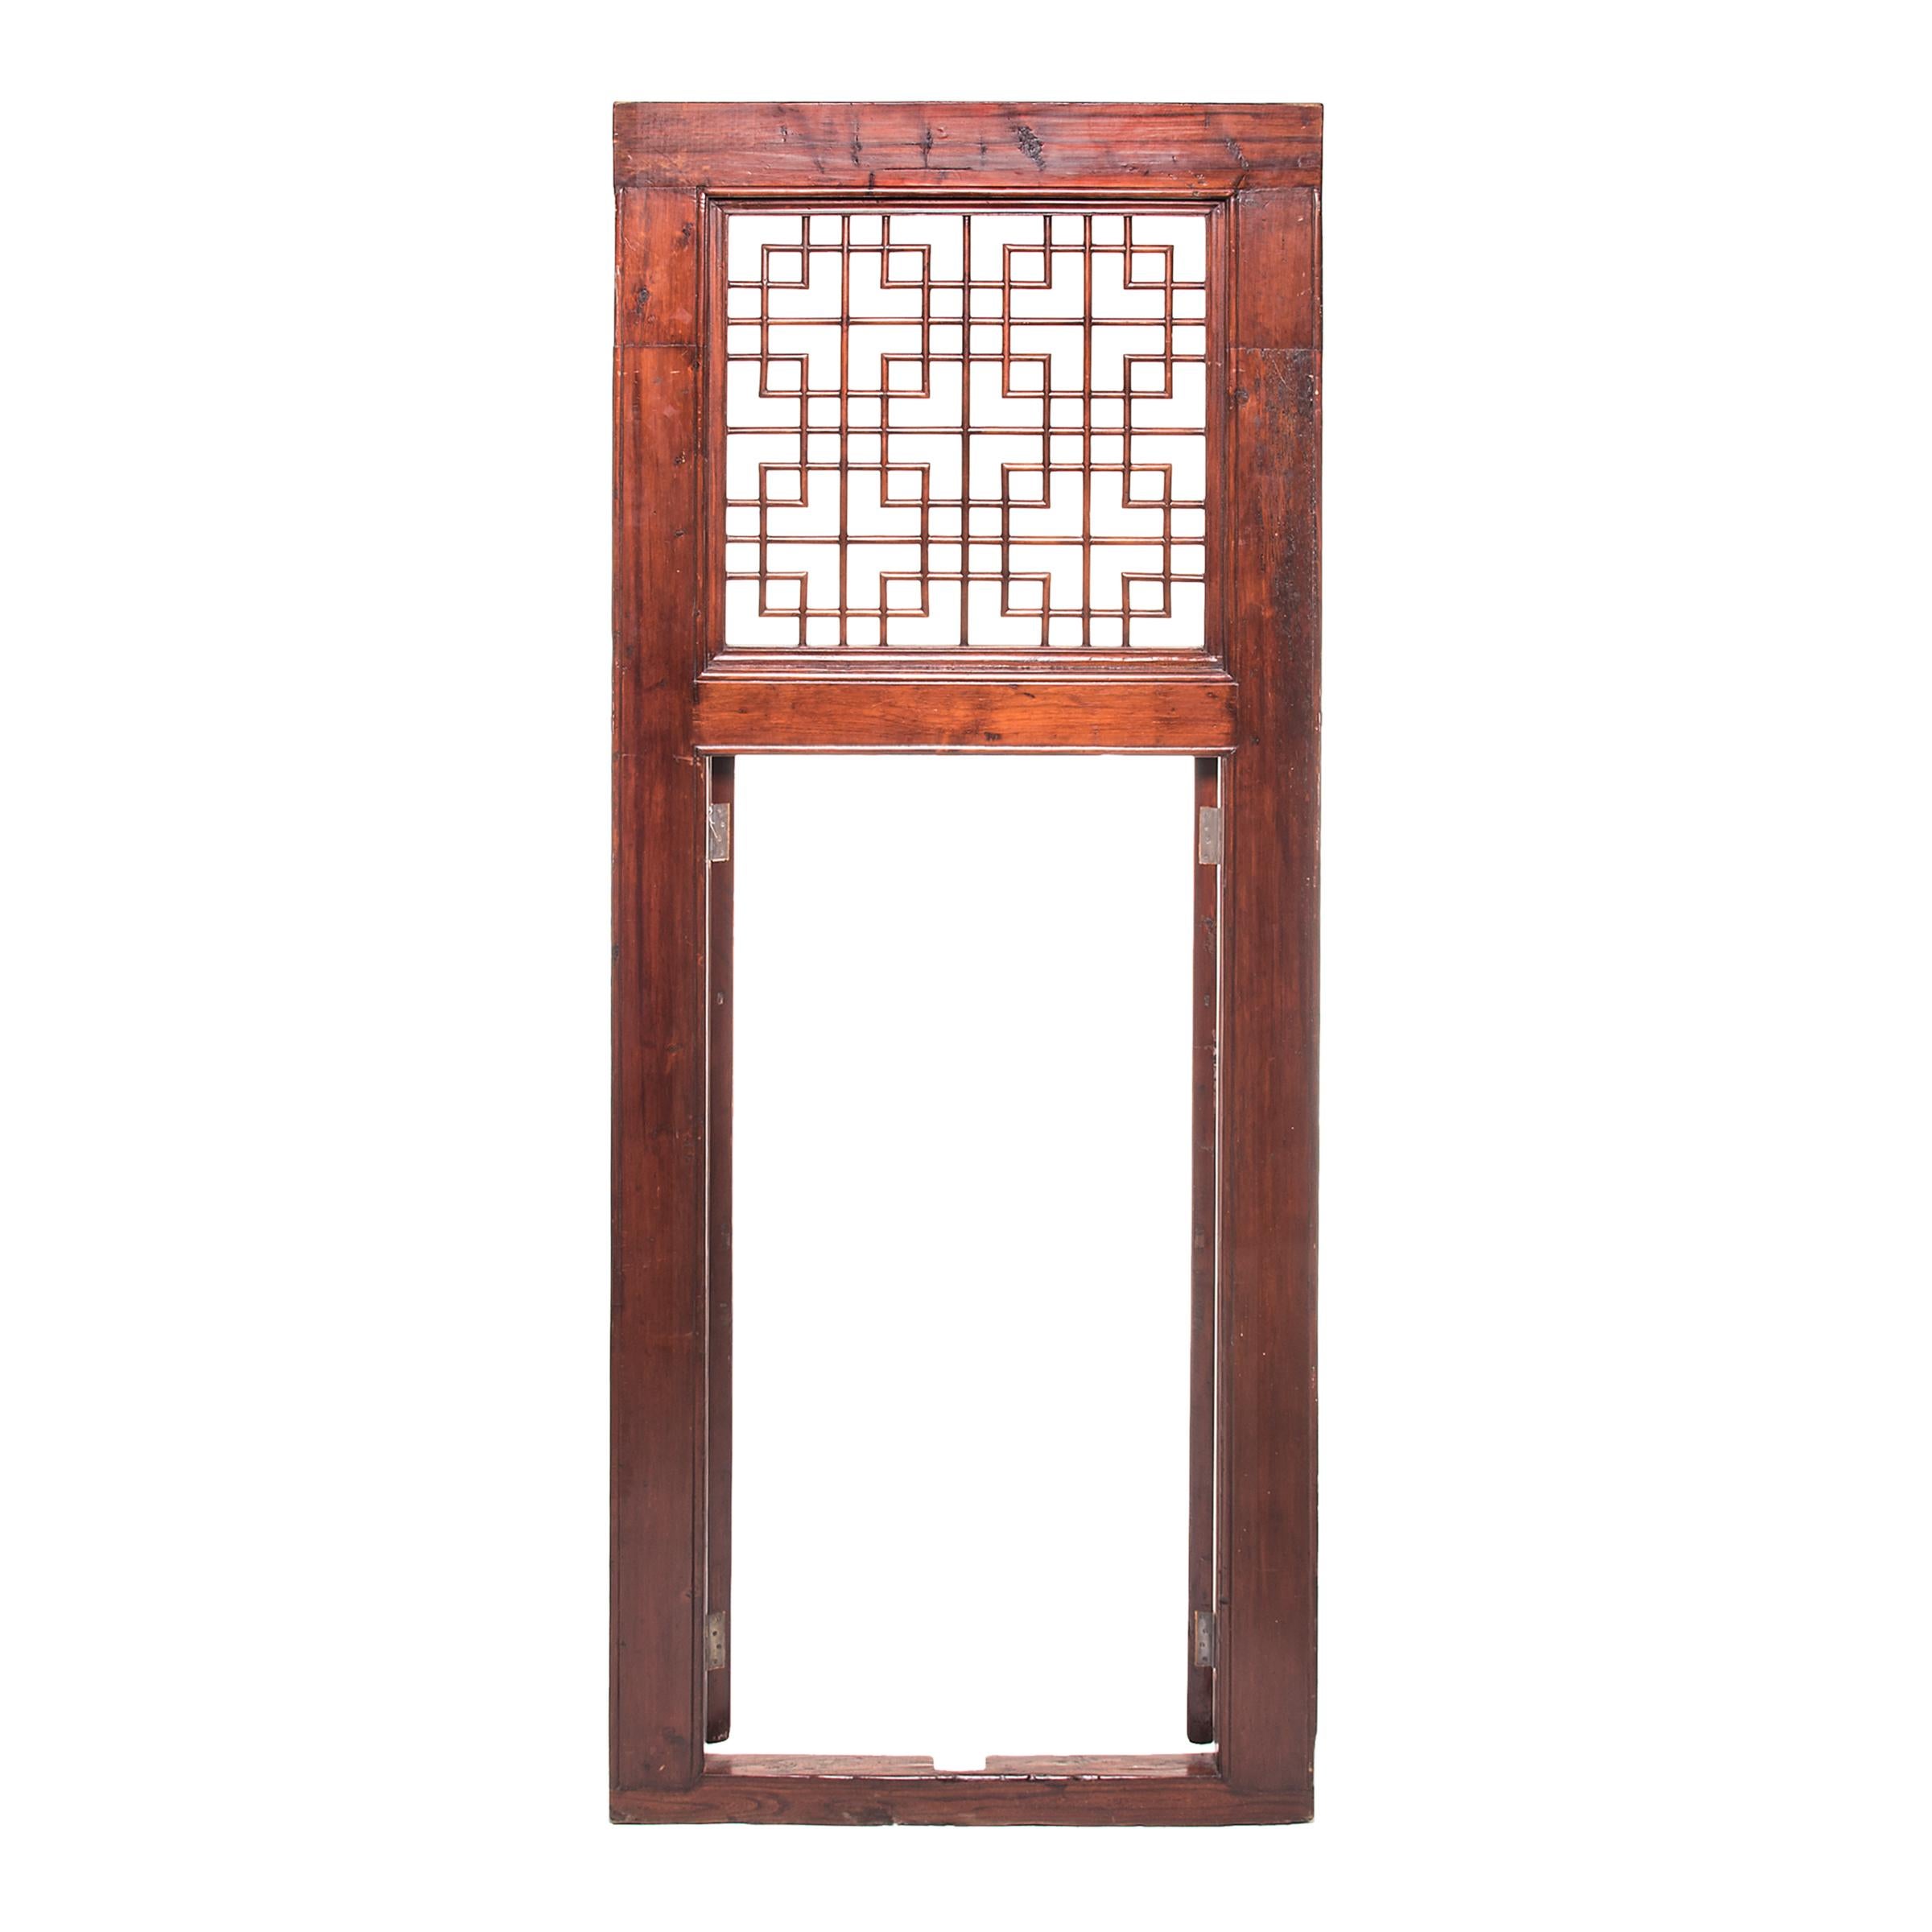 A hallmark of Qing-dynasty domestic architecture, hand carved lattice doors such as this one were used in provincial courtyard homes to allow light and air into a room while maintaining privacy. Graced with vertical brass pulls, two latticed doors